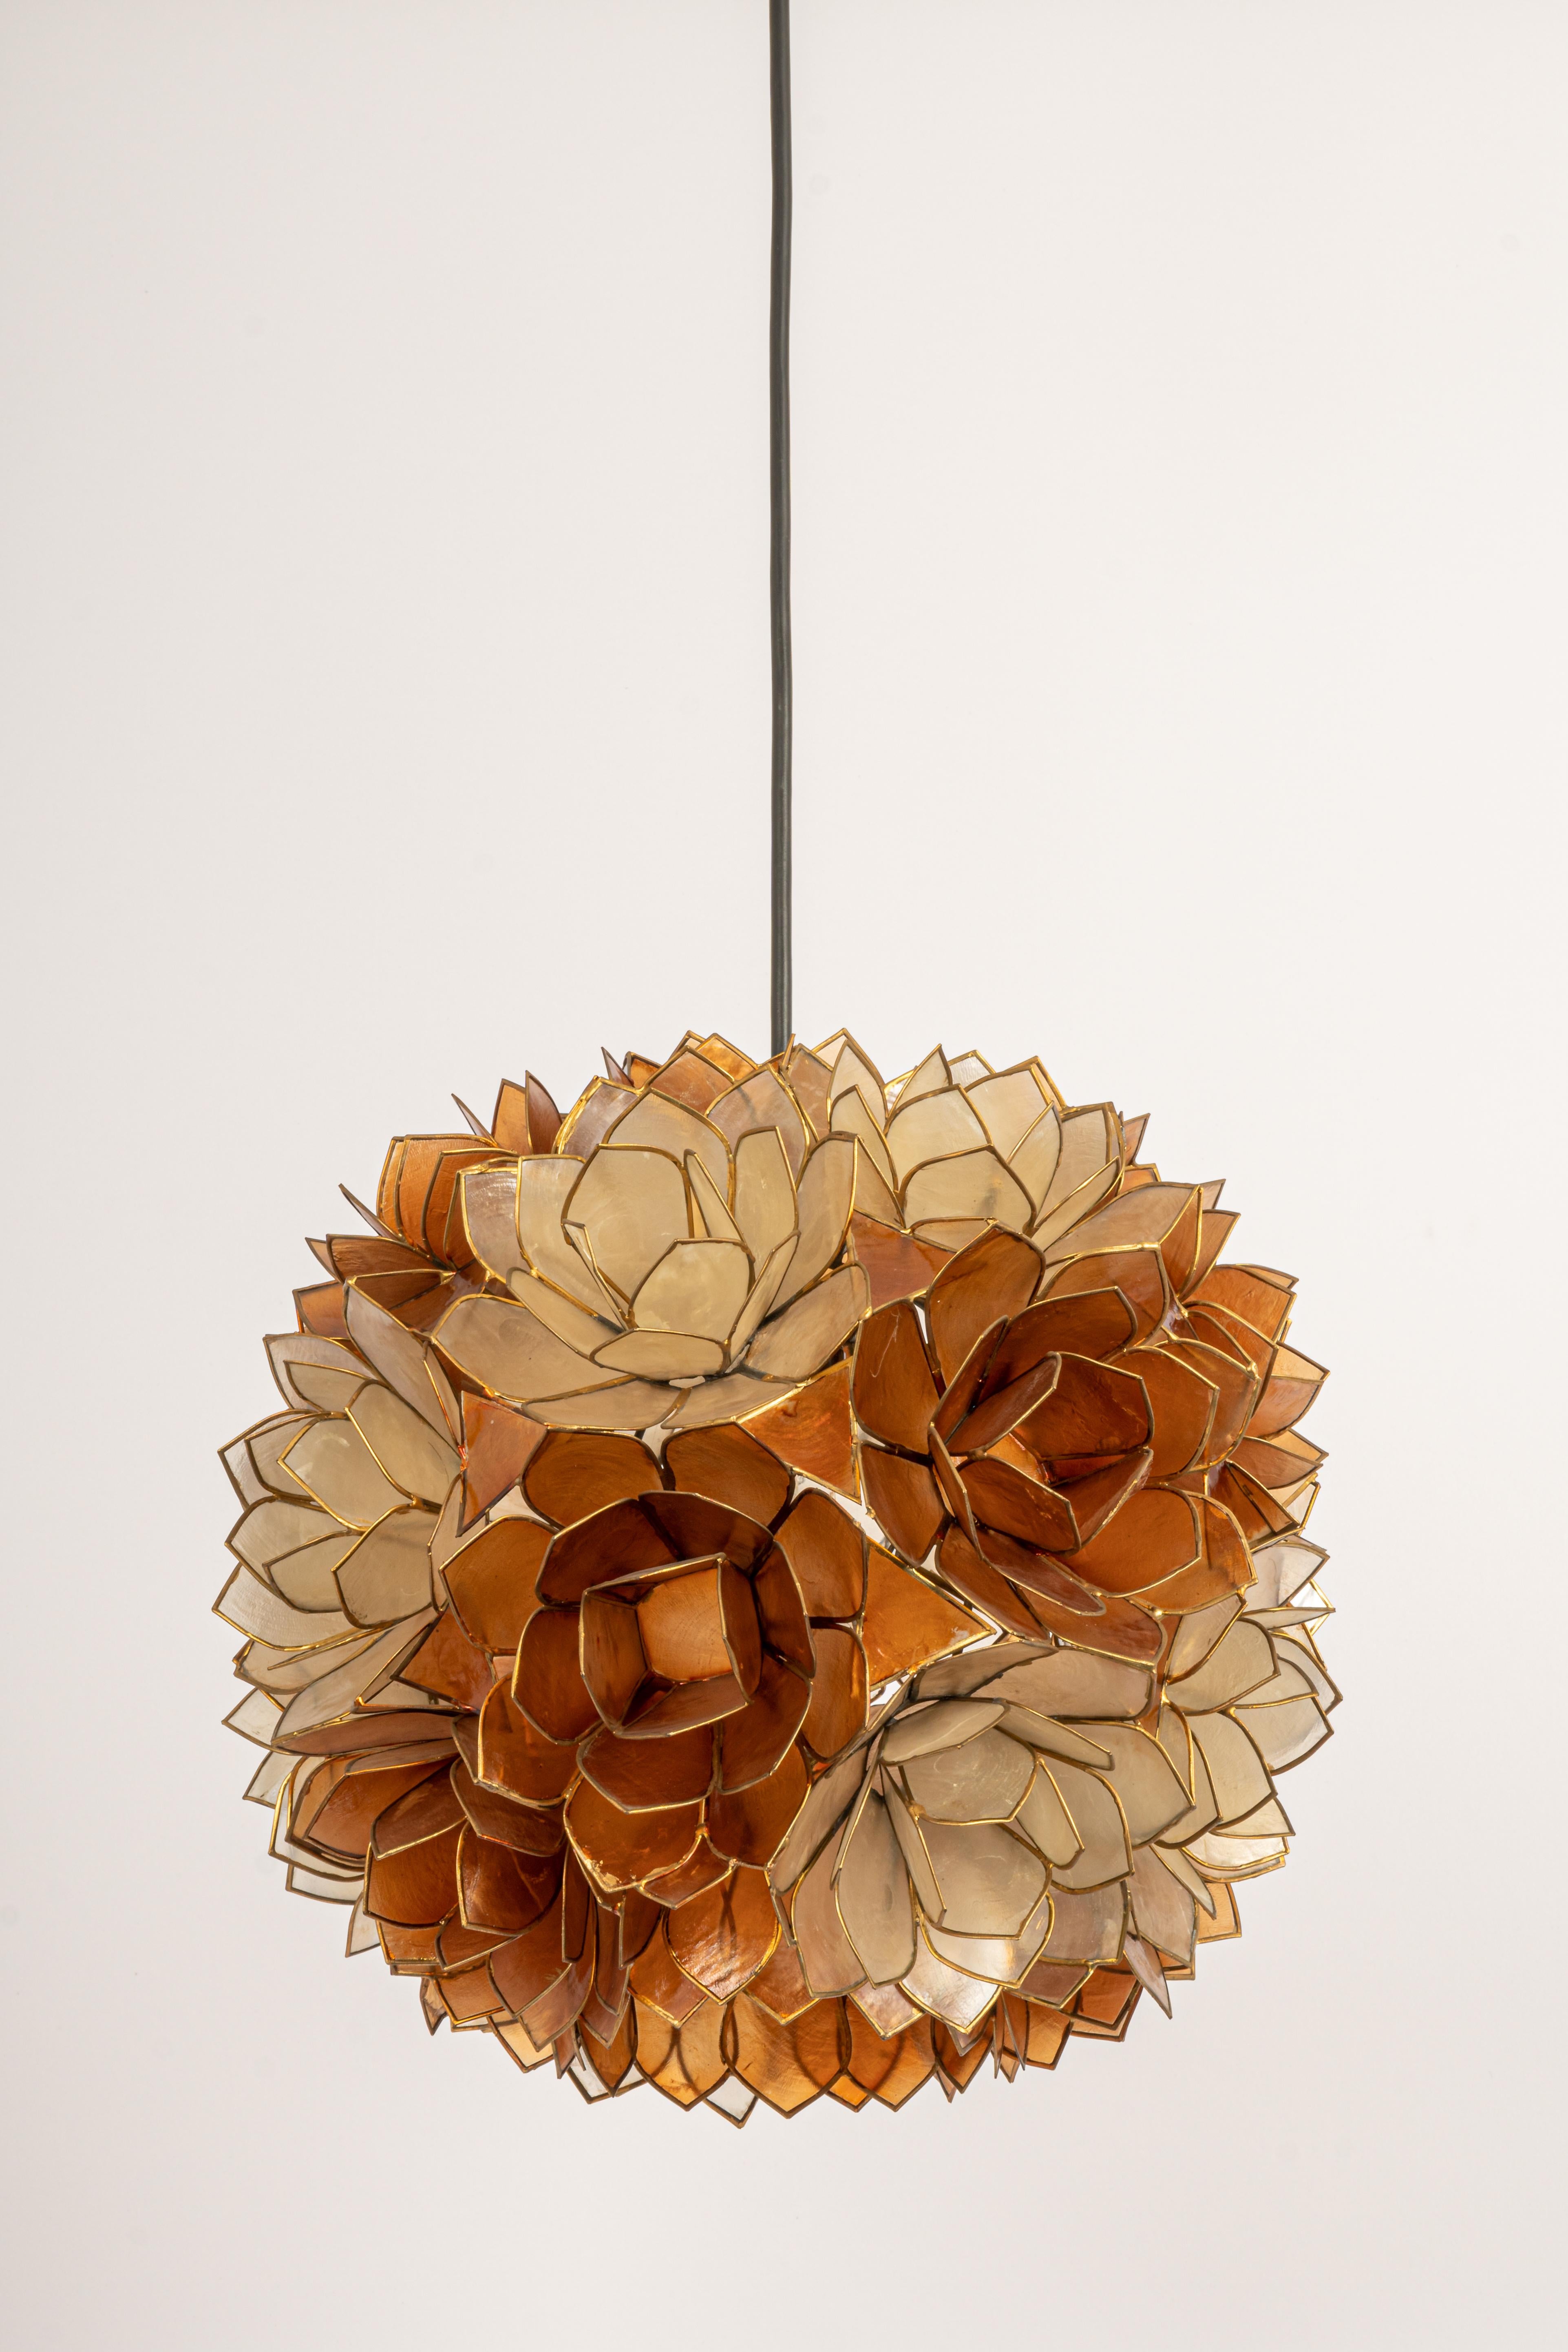 Mid-20th Century 1 of 2 Capiz Shell Lotus Ball Chandelier Pendant Light Germany, 1960s For Sale